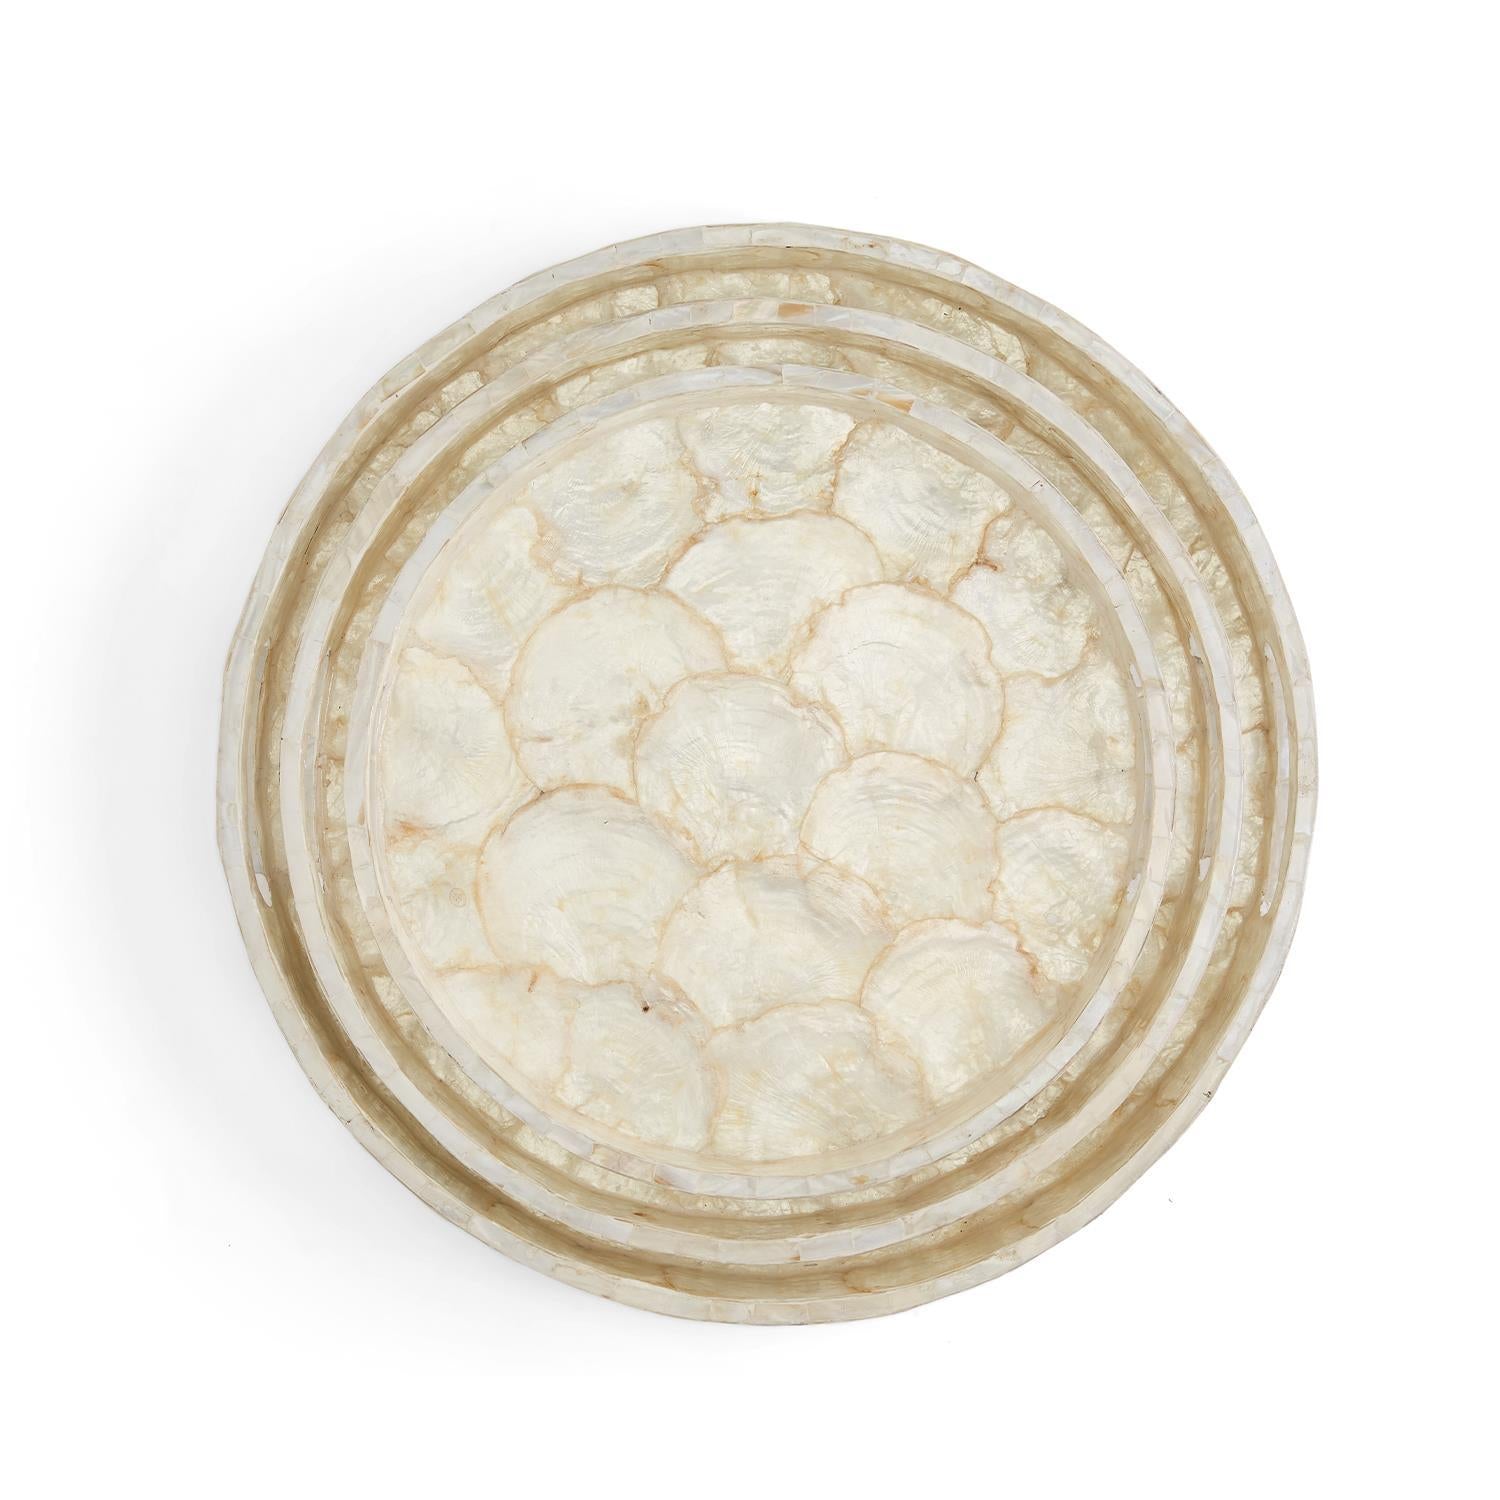 Two's Company S/3 Super White Capiz Shell Accent Round Gallery Trays